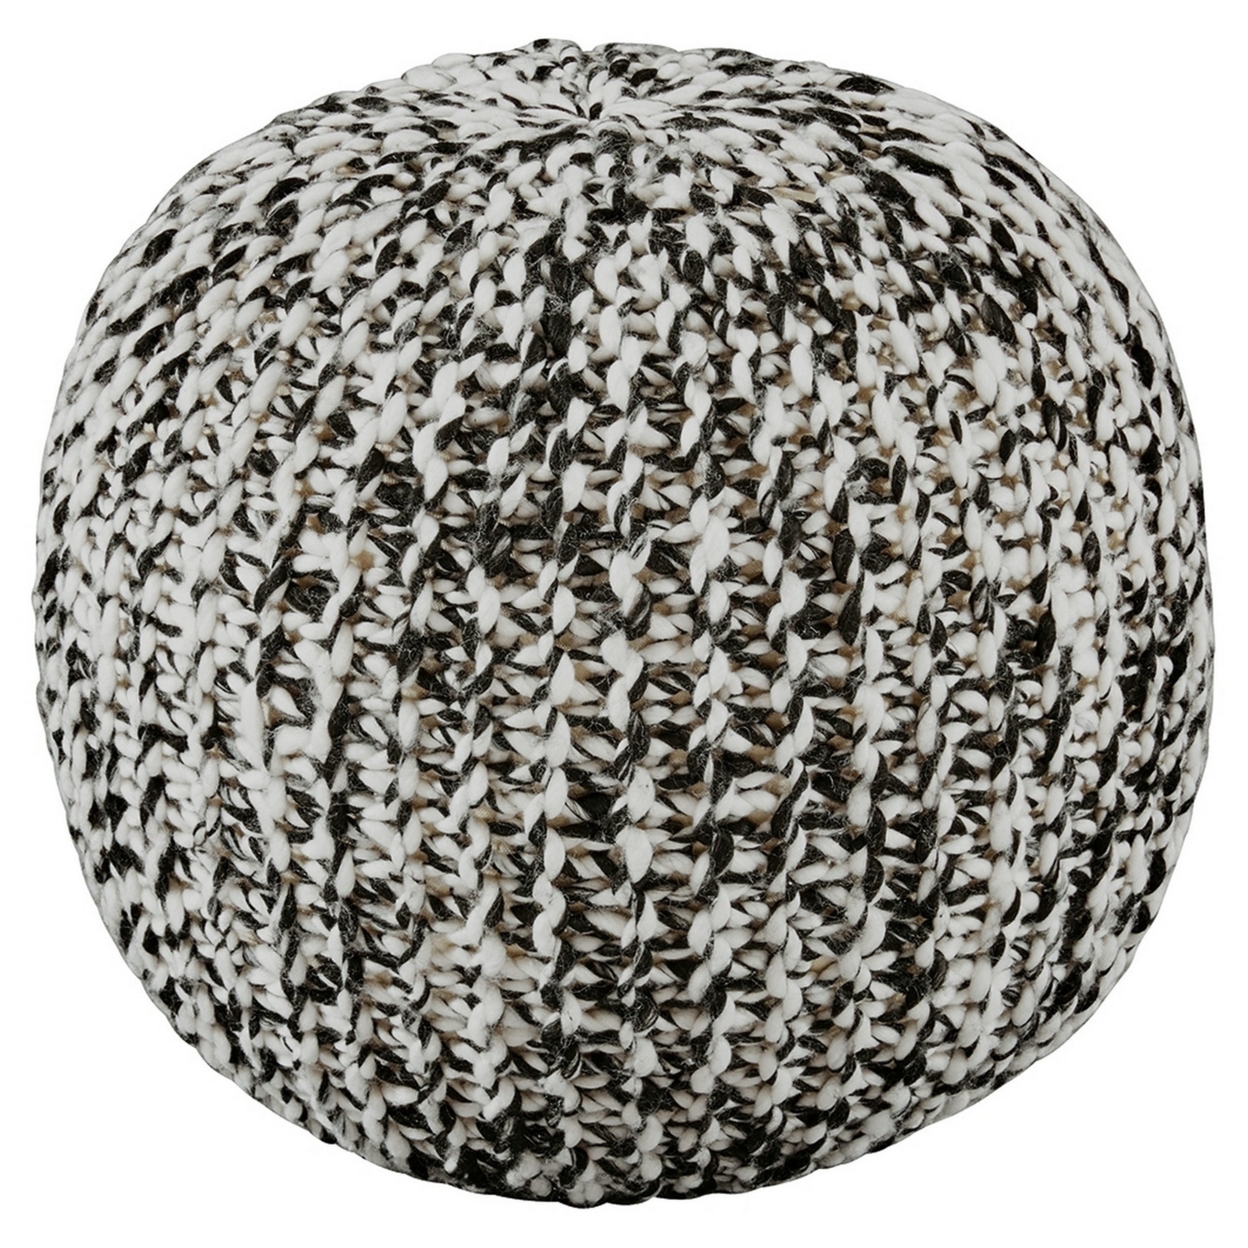 Round Pouf With Hand Knit Details, Black And White- Saltoro Sherpi